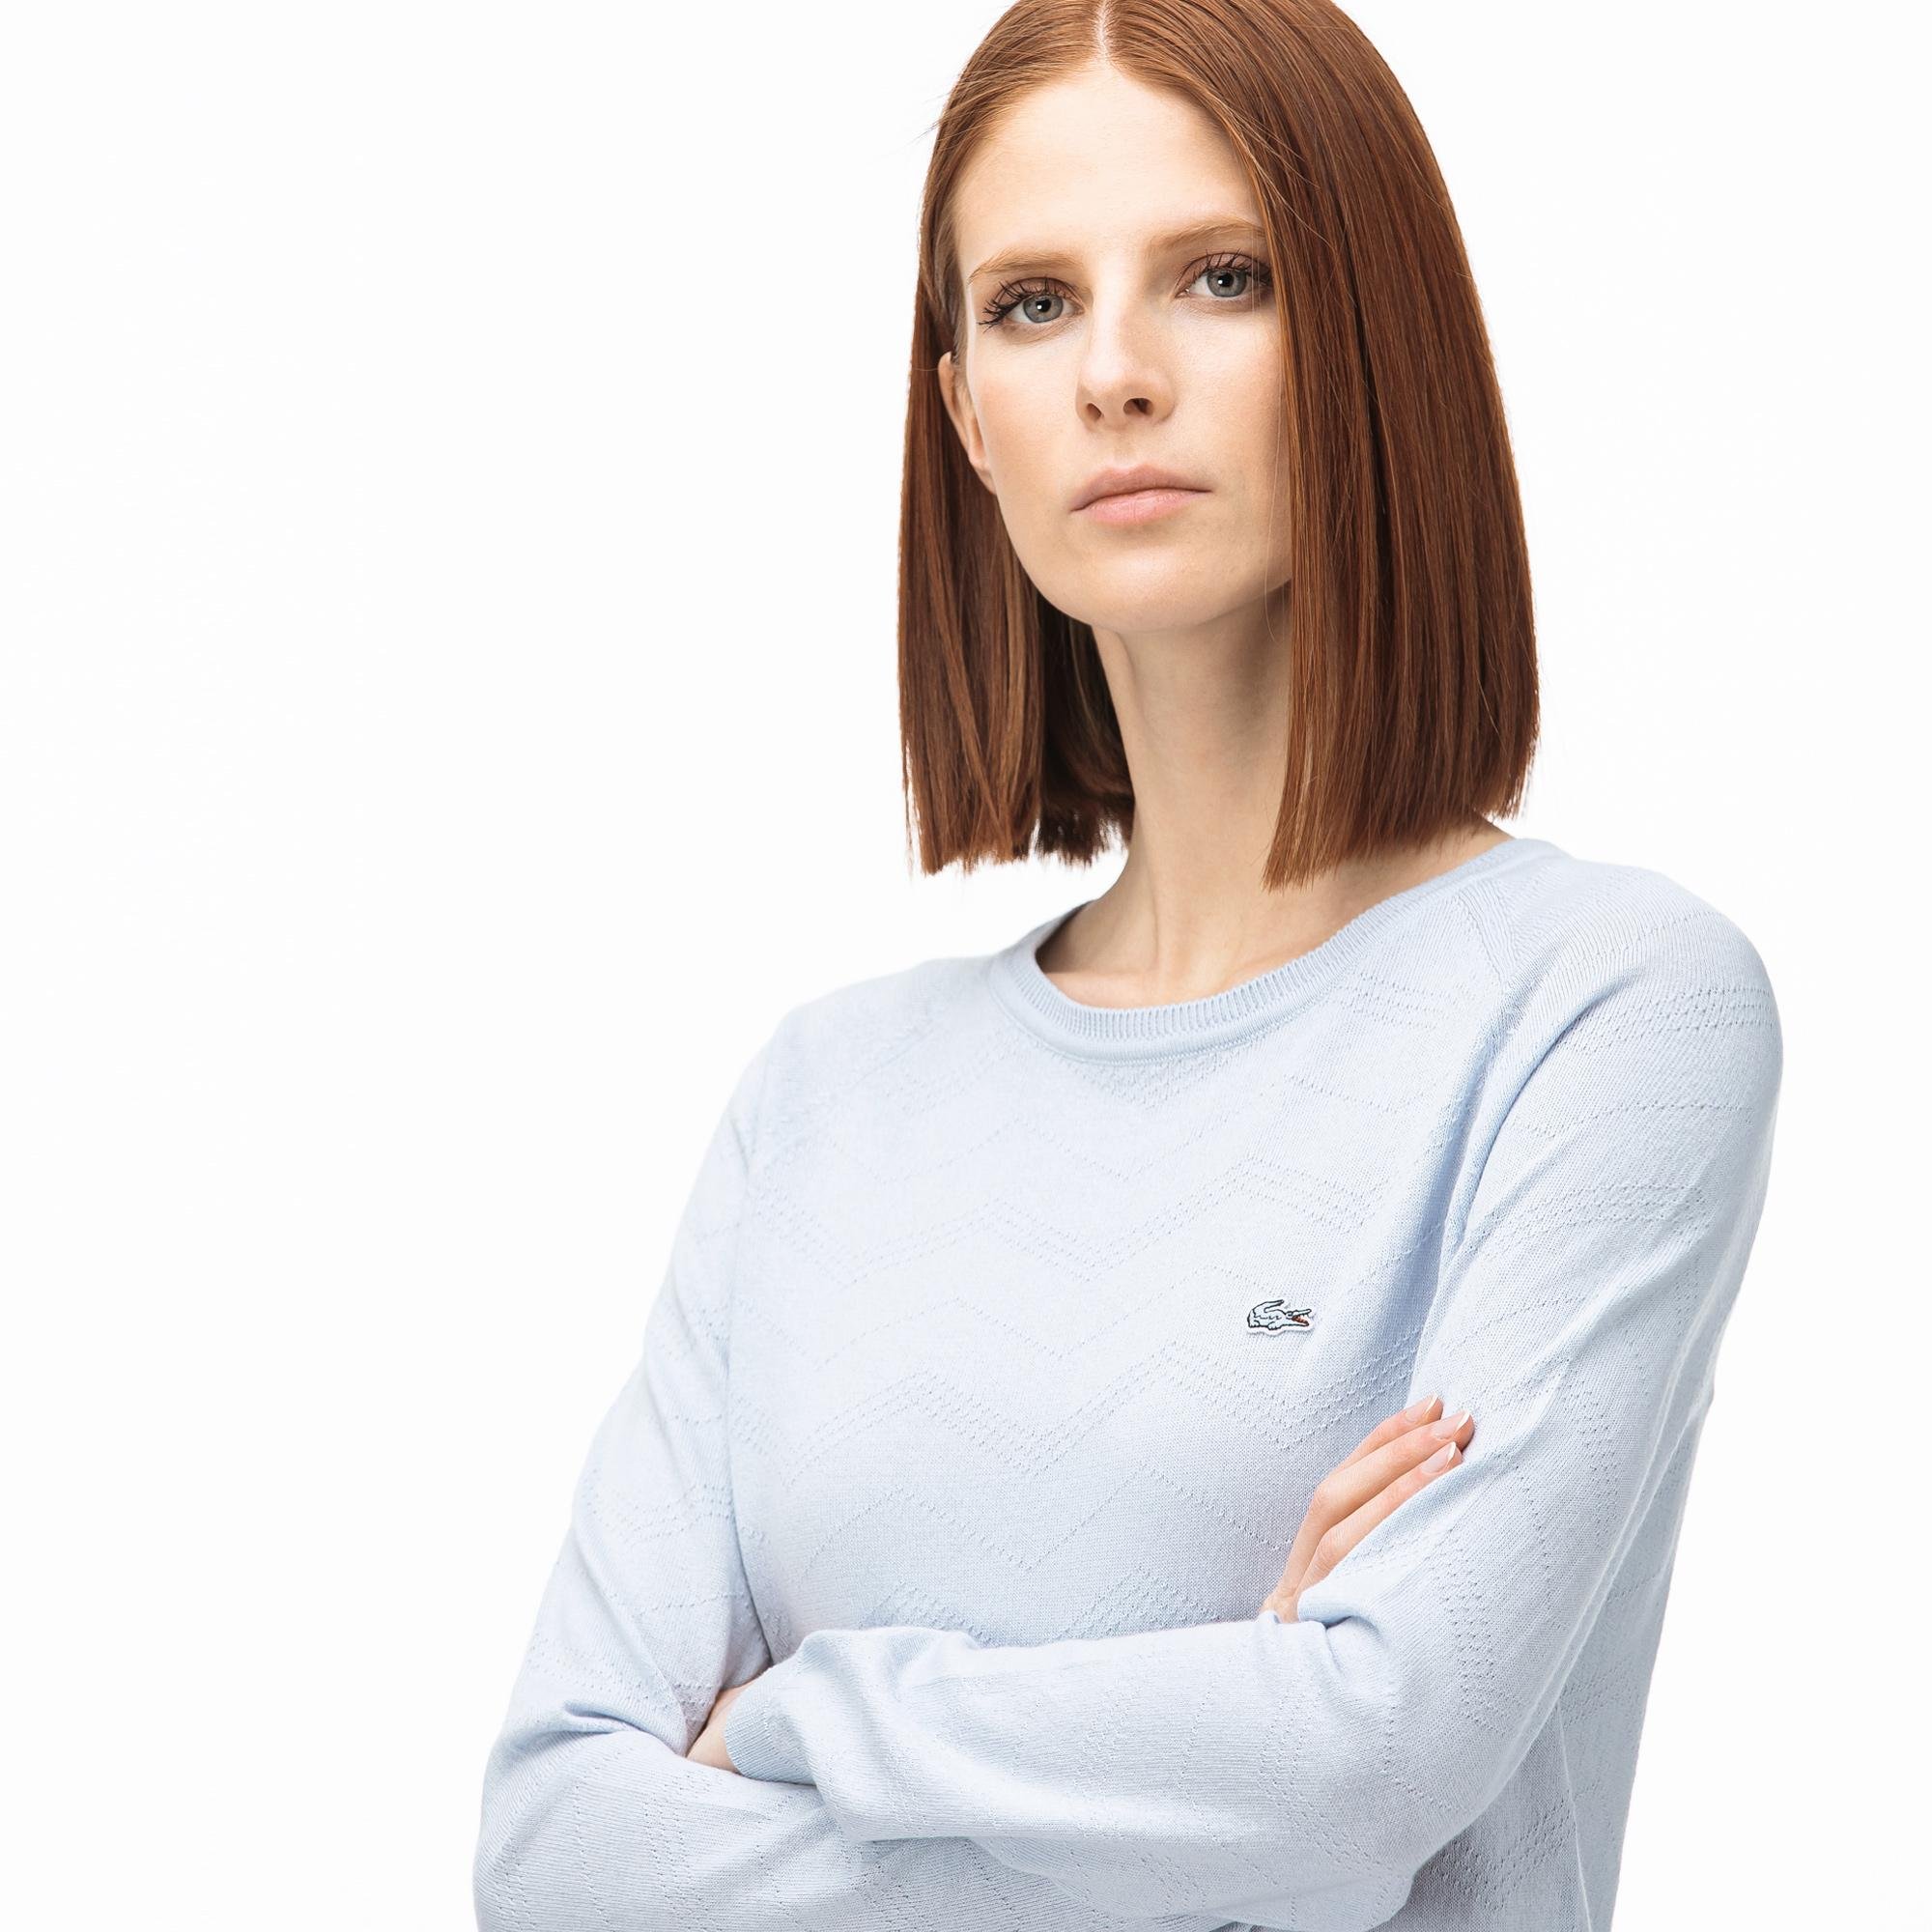 Lacoste Women's Round Neck Tricot Sweater